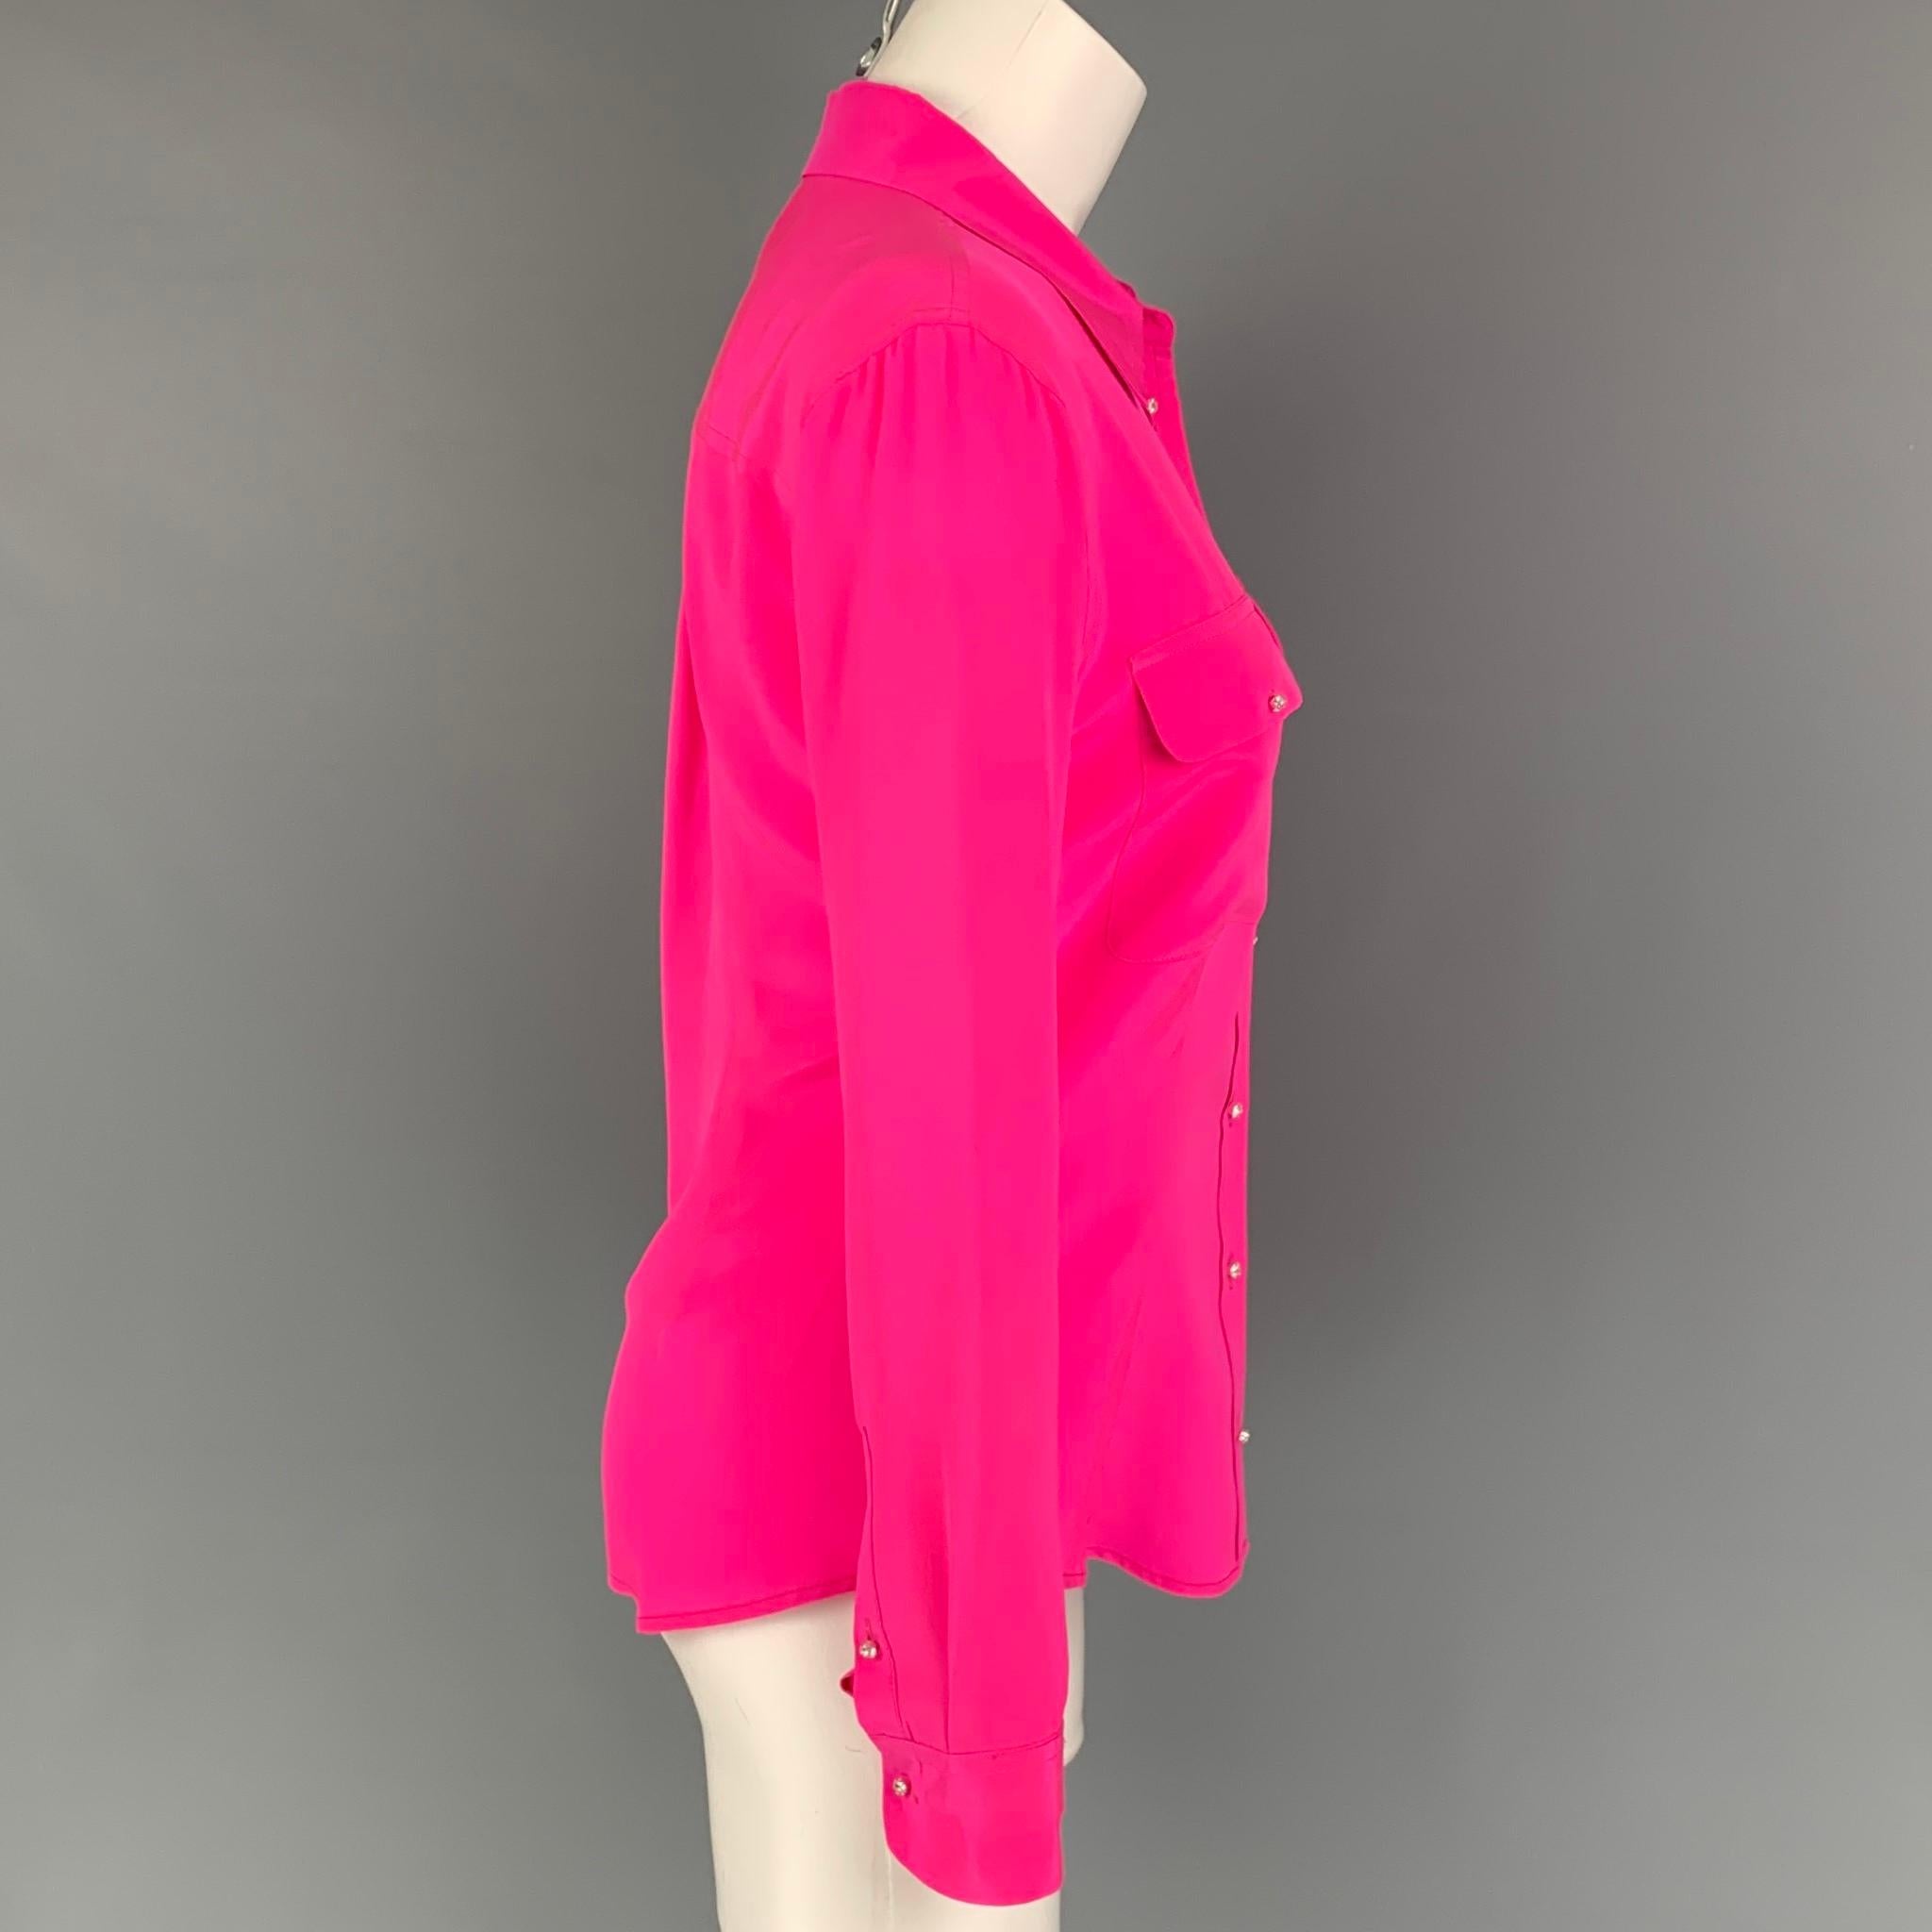 EQUIPMENT shirt coms in a pink silk featuring rhinestone buttons, flap pockets, and a spread collar. 

Very Good Pre-Owned Condition.
Marked: S

Measurements:

Shoulder: 16 in.
Bust: 35 in.
Sleeve: 24 in.
Length: 25 in. 